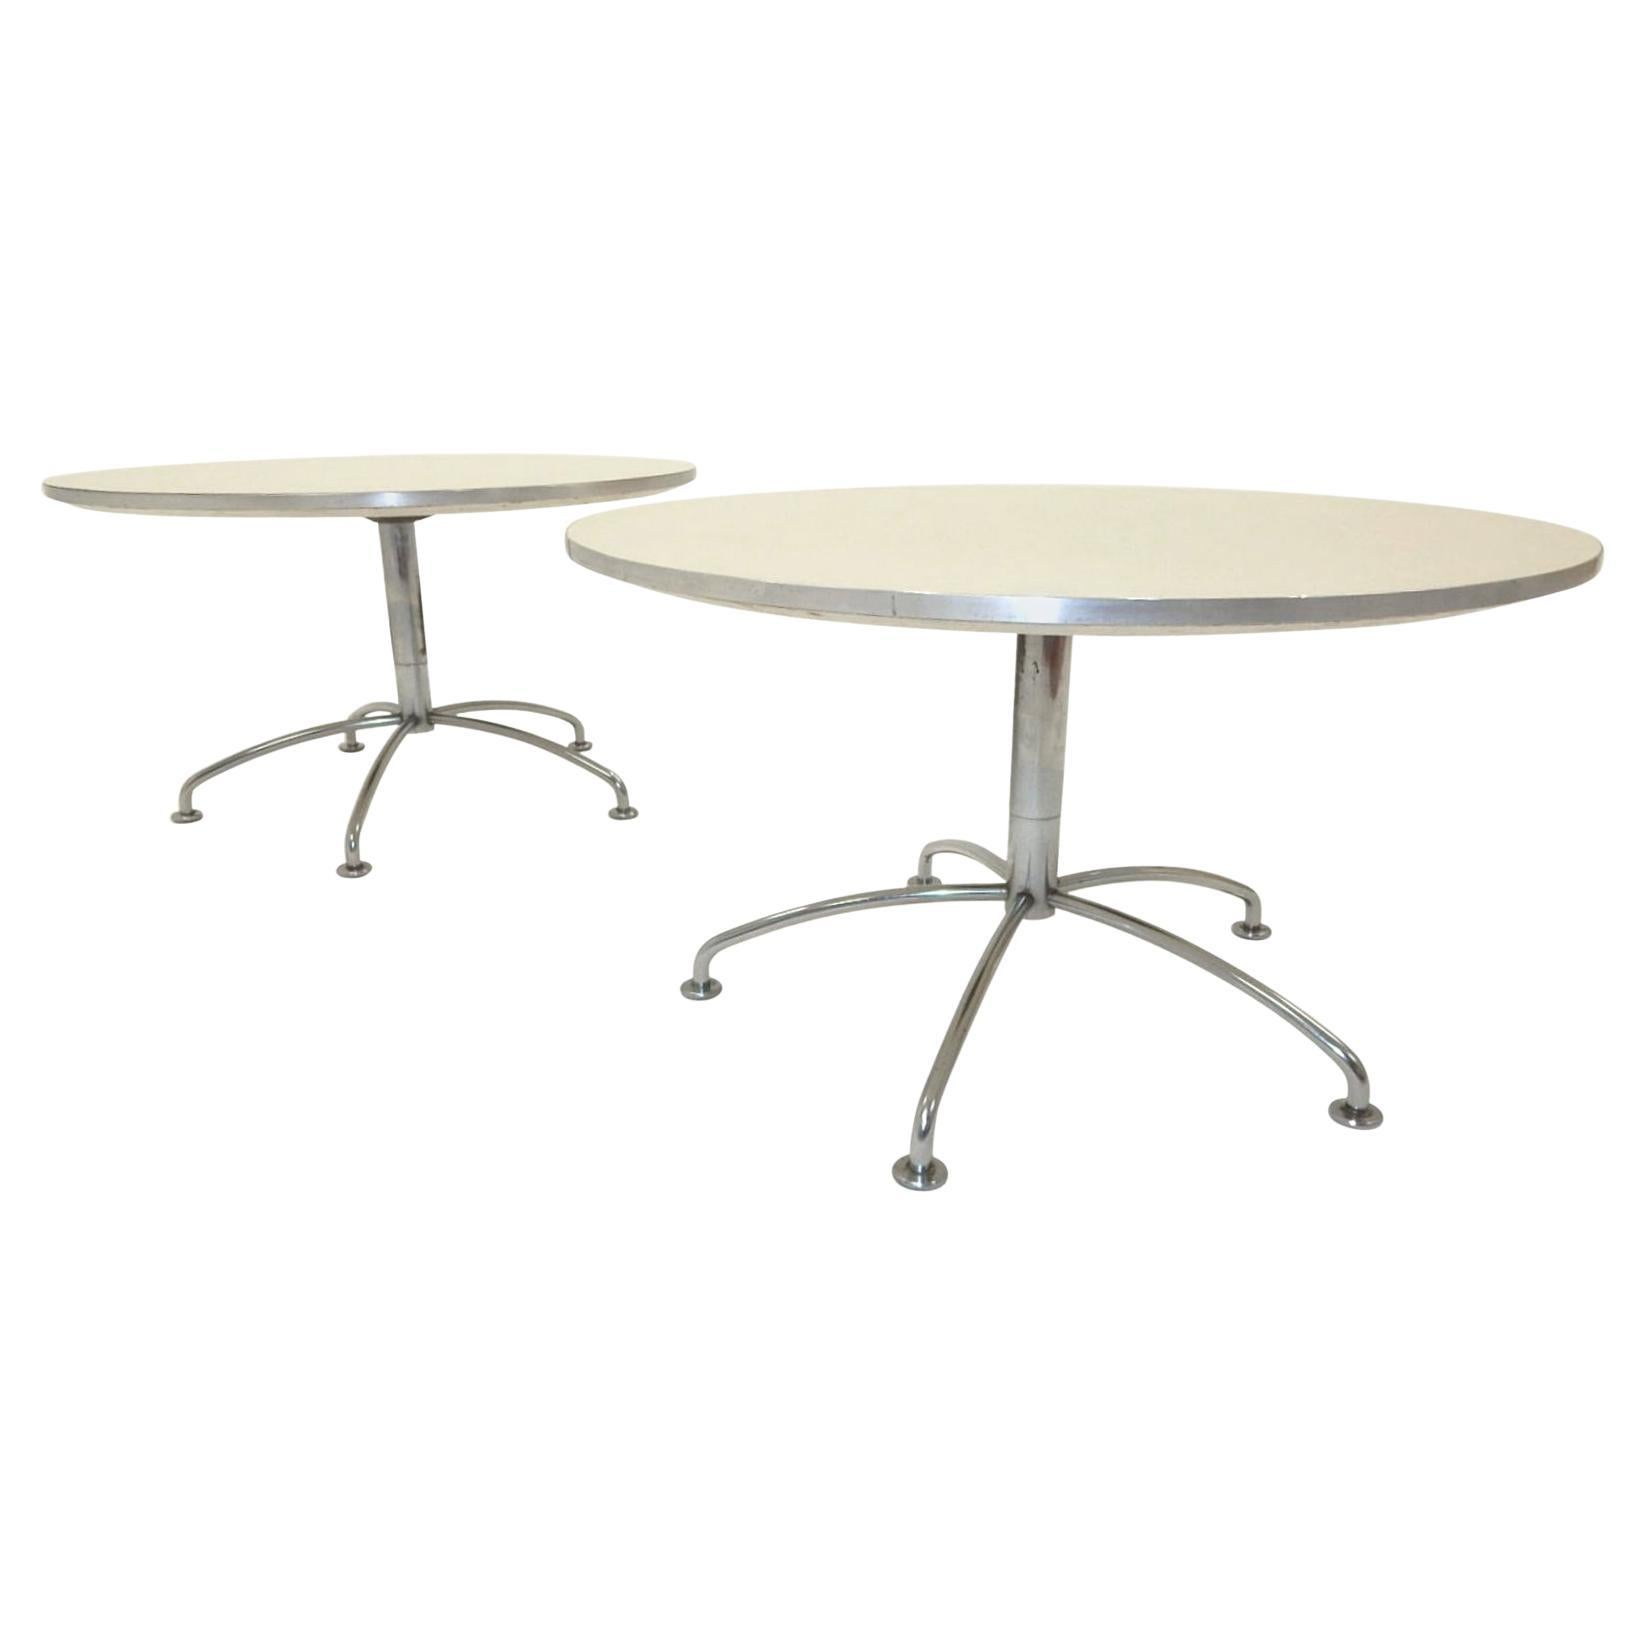 A pair of spider leg side table designed by Fritz Hansen for the lounge at Scandinavian Airlines in Denmark.
Nickel-plated base with enameled wood top trimmed in aluminum.
Labeled on bottoms 